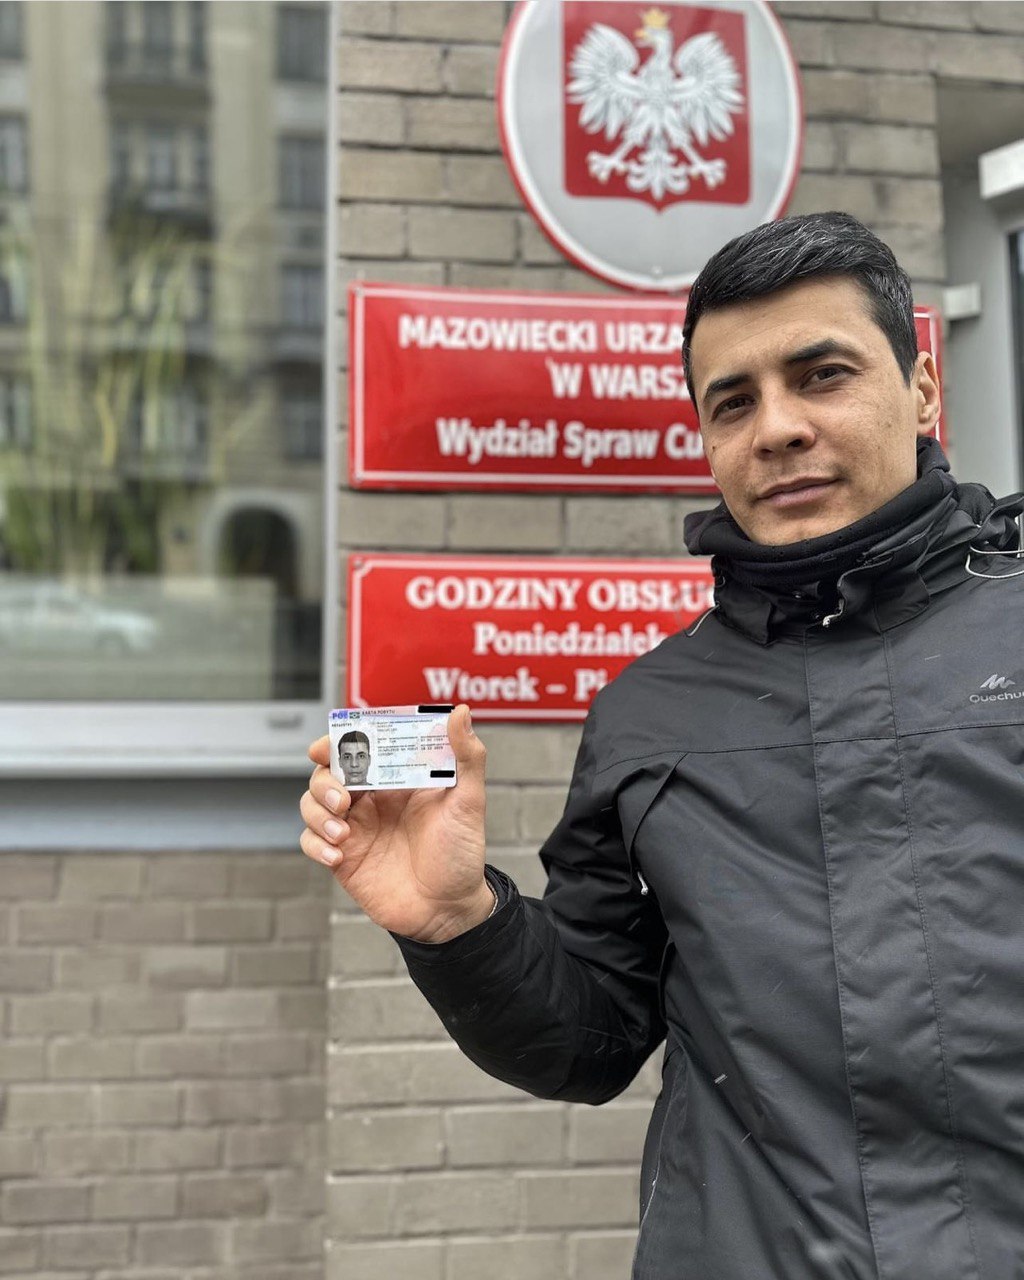 Residence permit in Poland